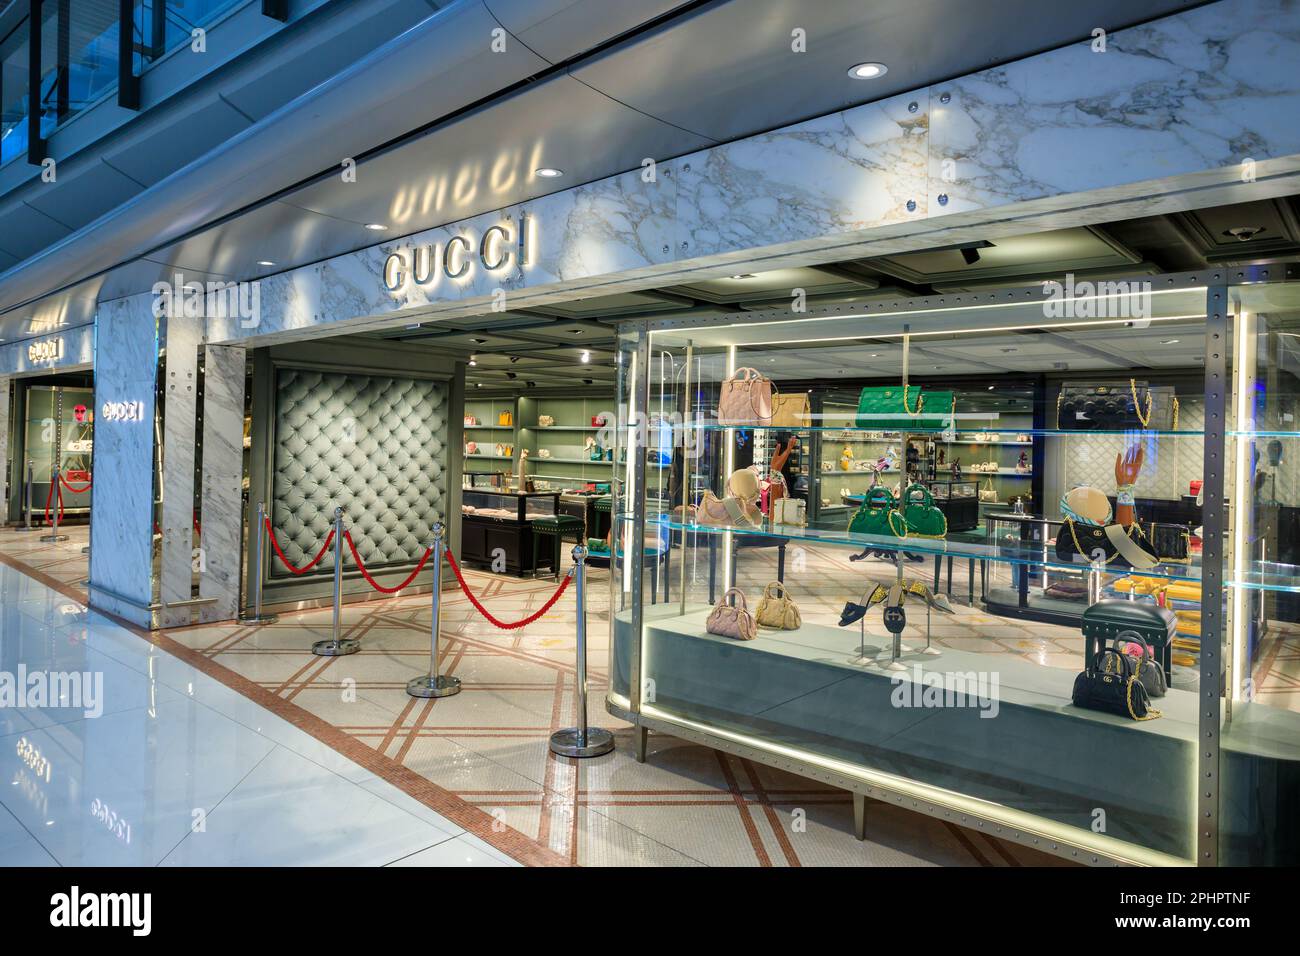 LUXURY SHOPPING AT ISTANBUL AIRPORT - FENDI, GUCCI, LOUIS VUITTON AND MORE  